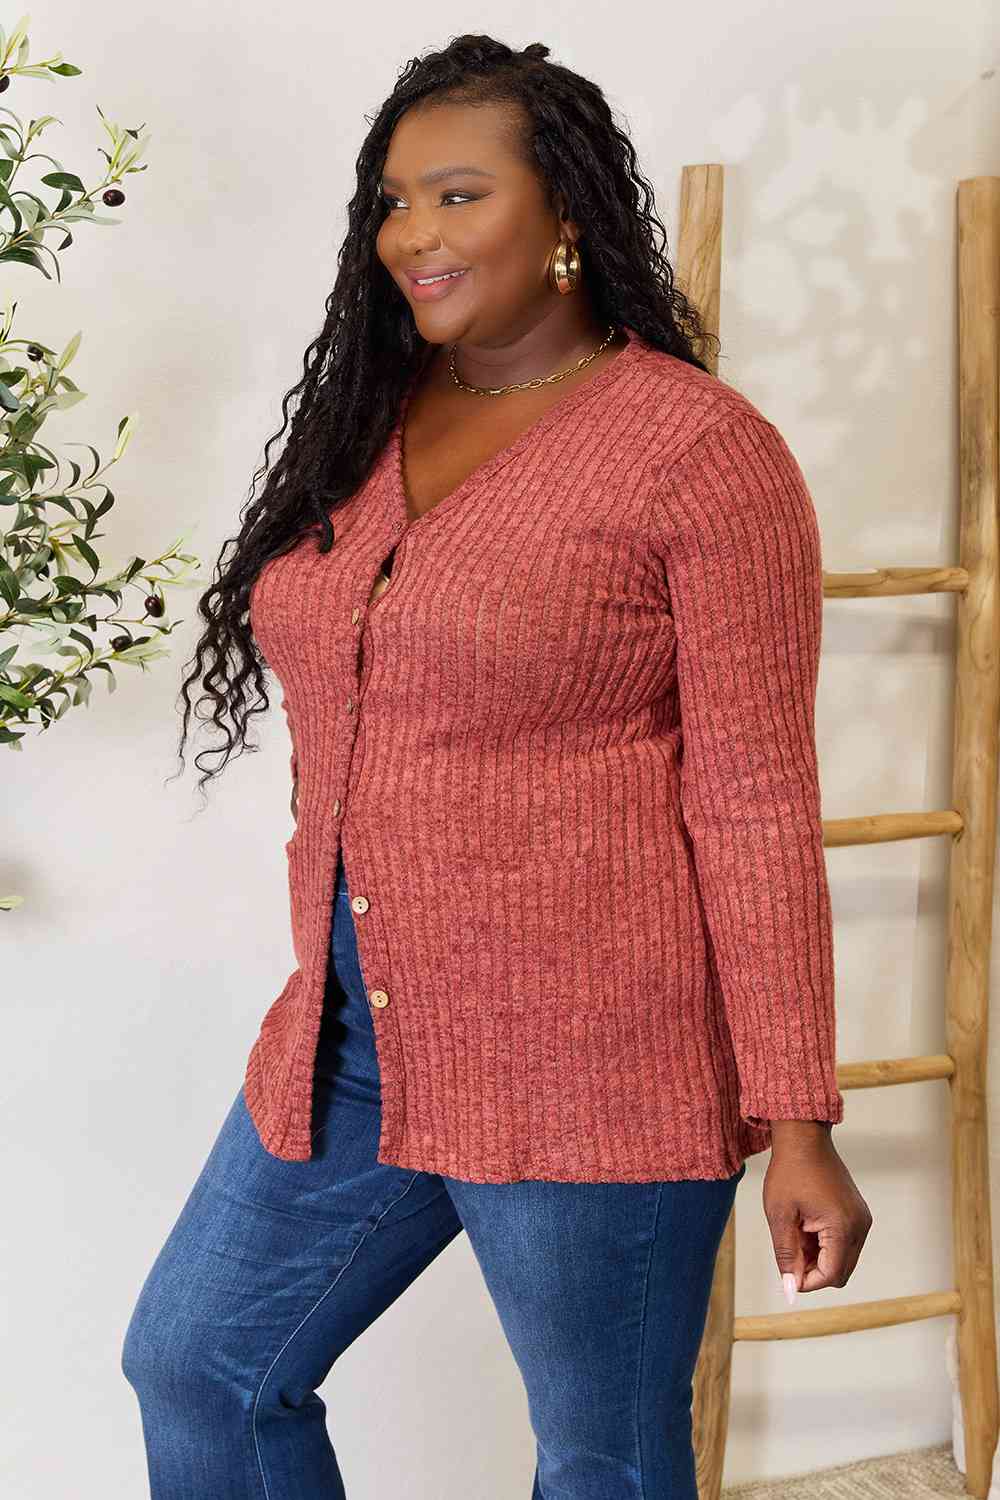 Ribbed Button-Up Cardigan with Pockets